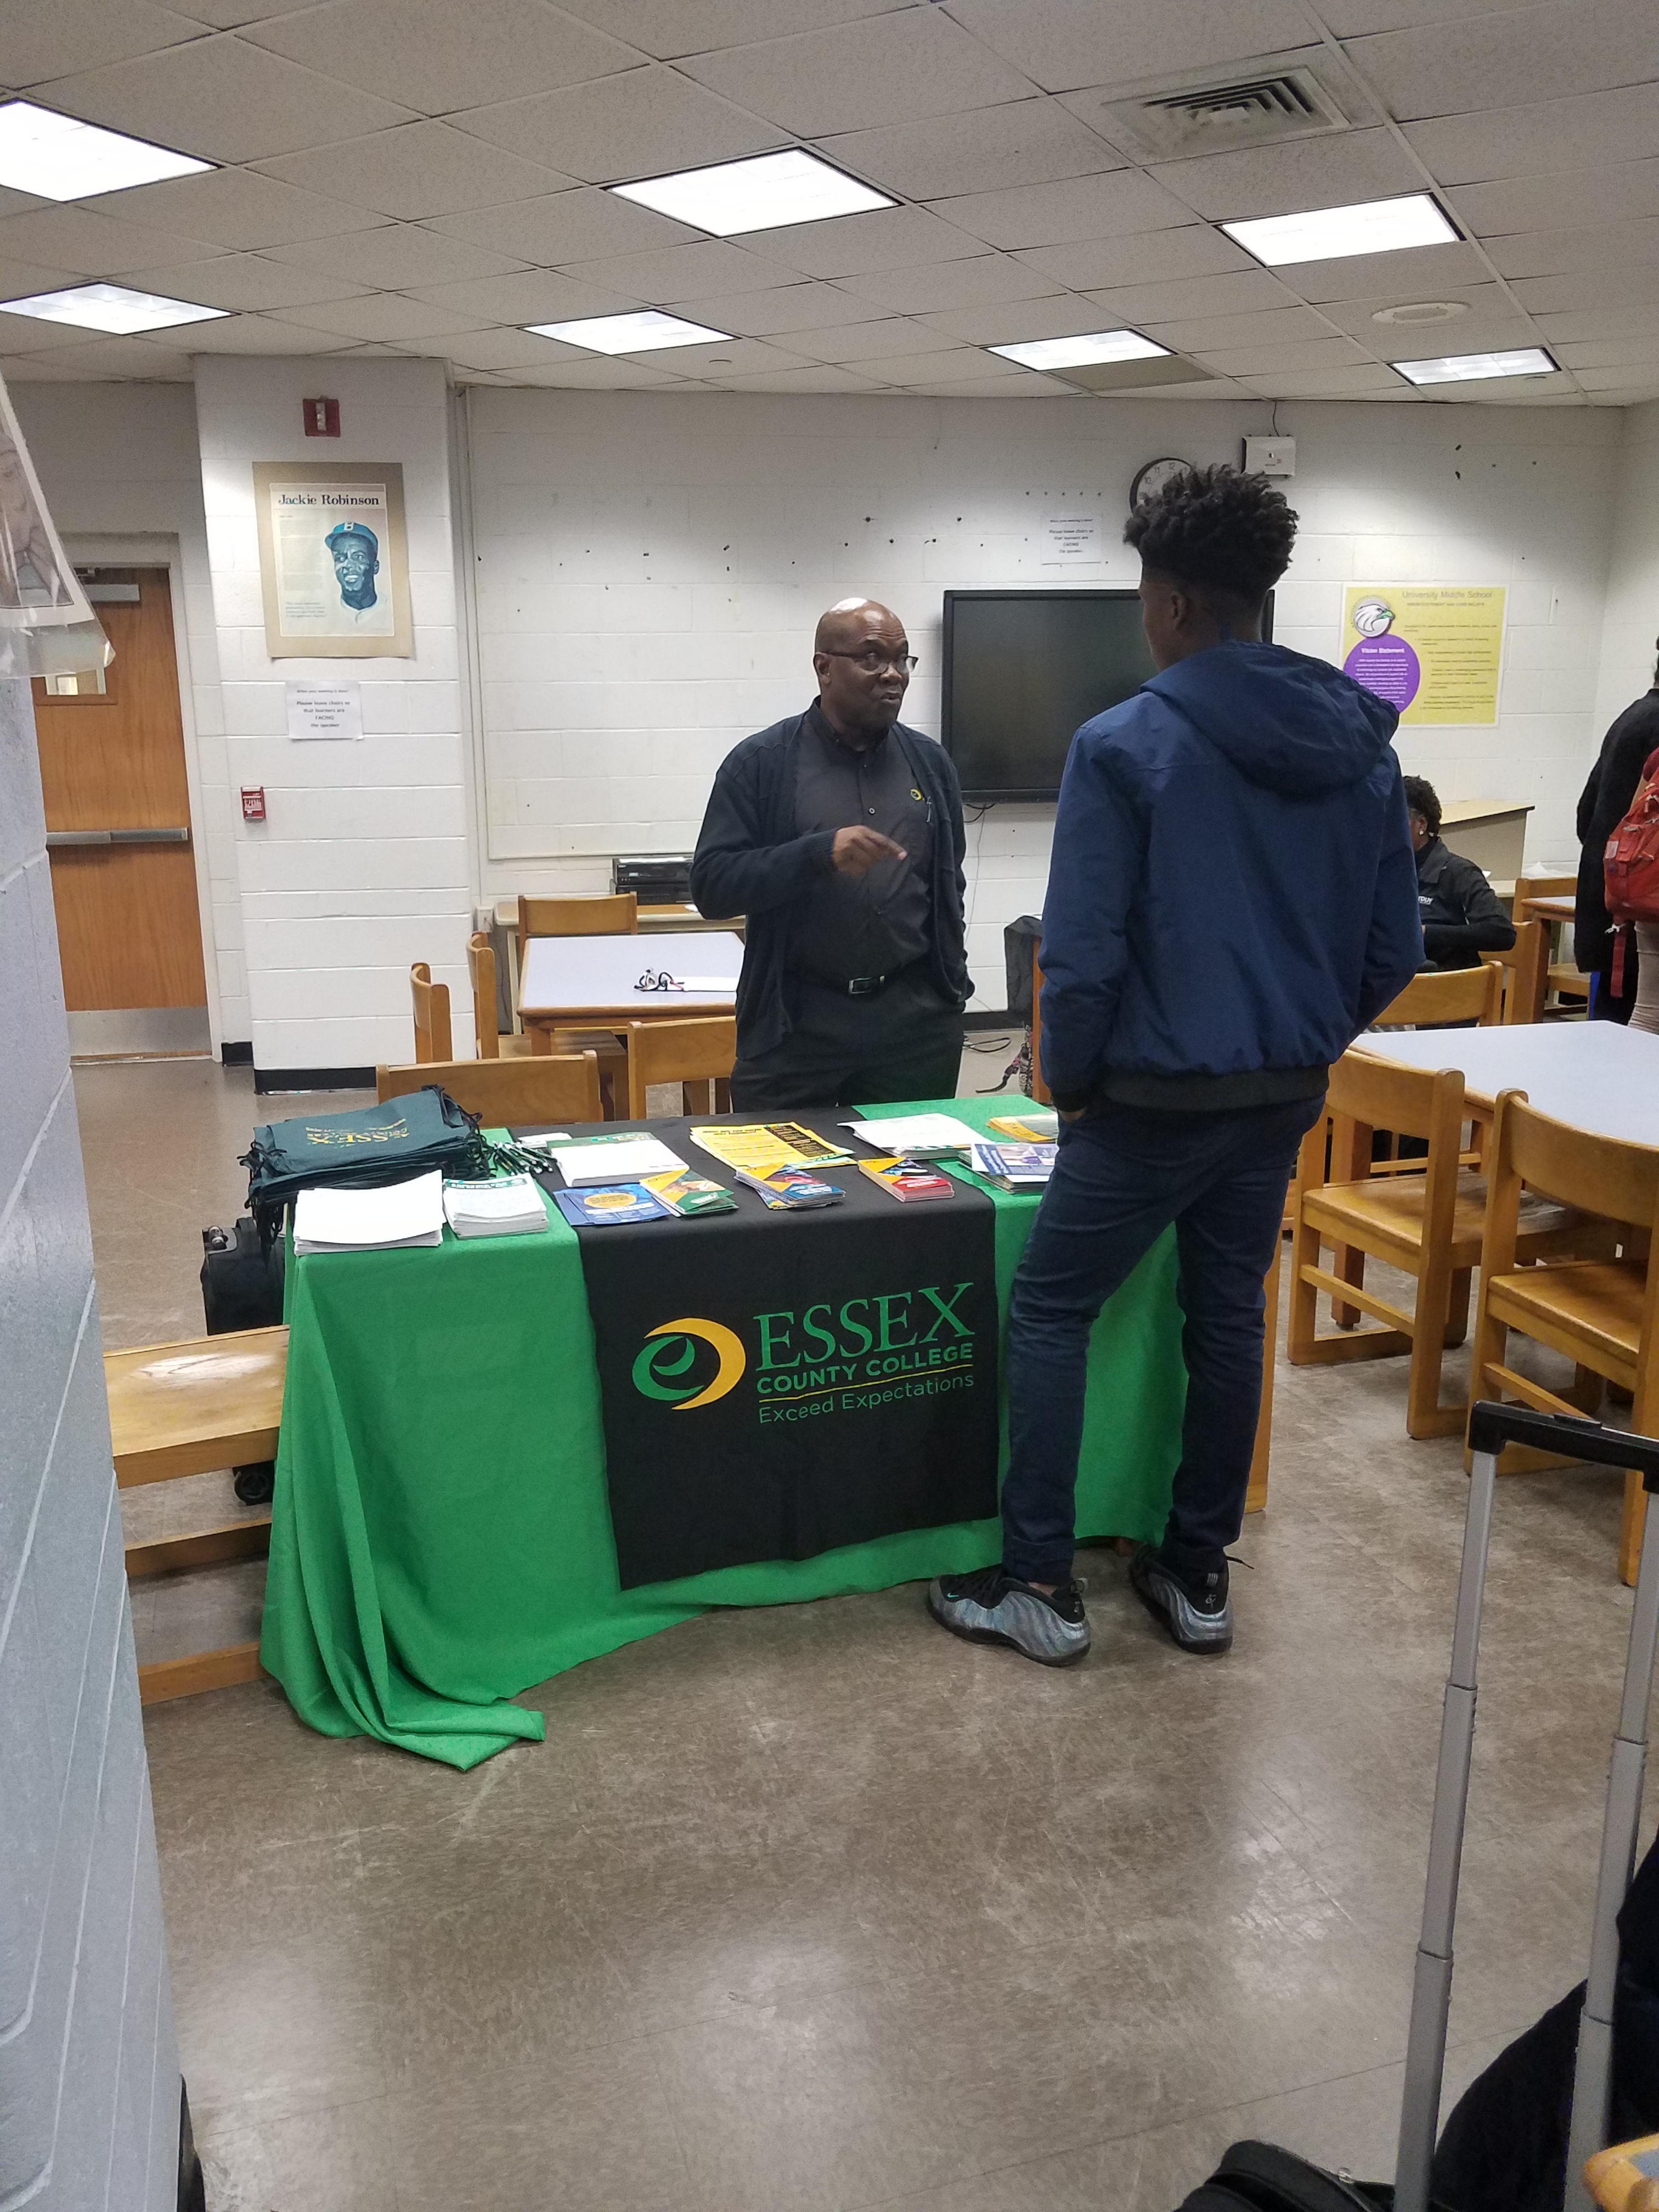 A BKA student getting information from an Essex County College representative.